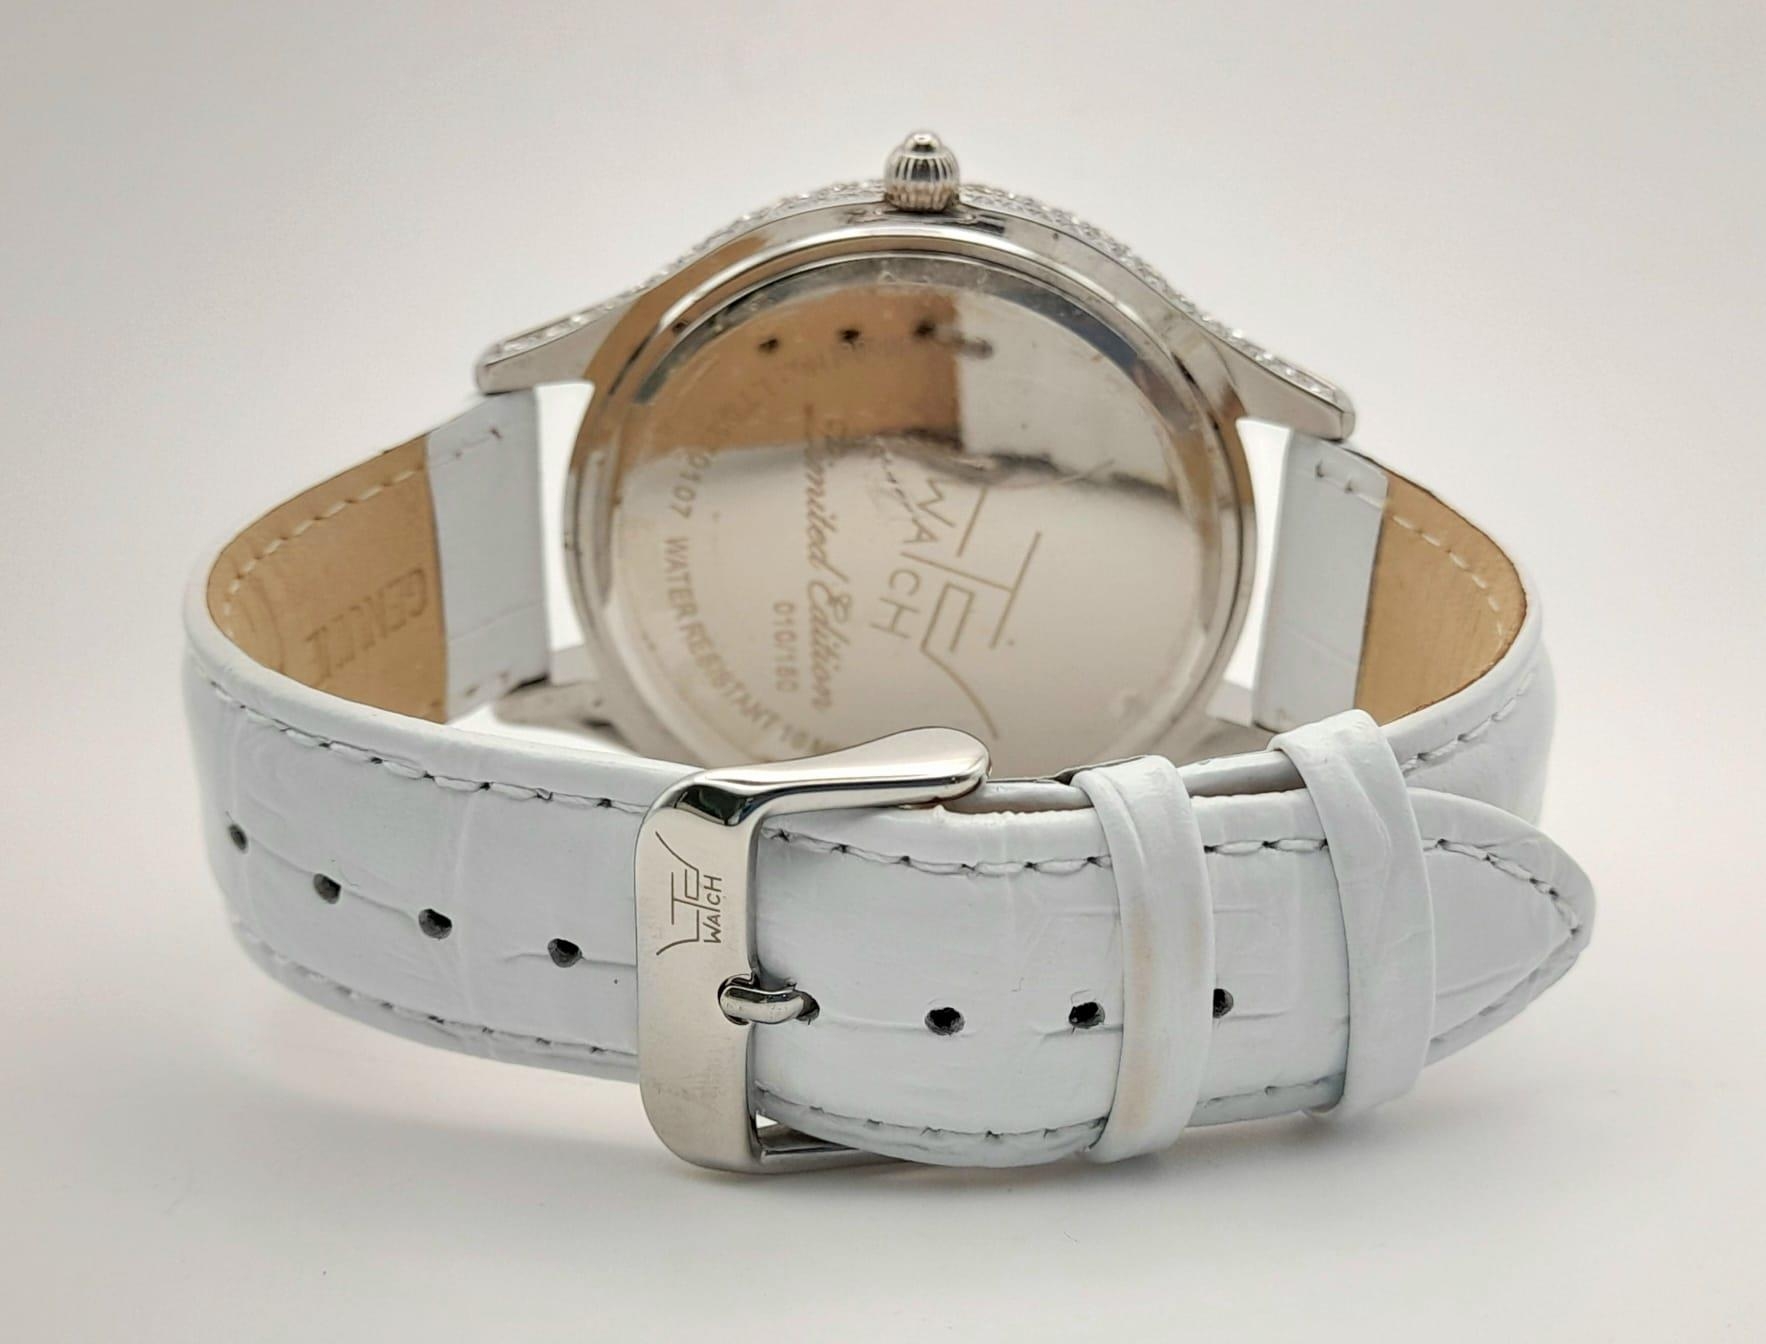 A Ltd Fancy Dress Watch. White leather strap. Large white stone case - 50mm. Quartz movement. In - Image 4 of 8